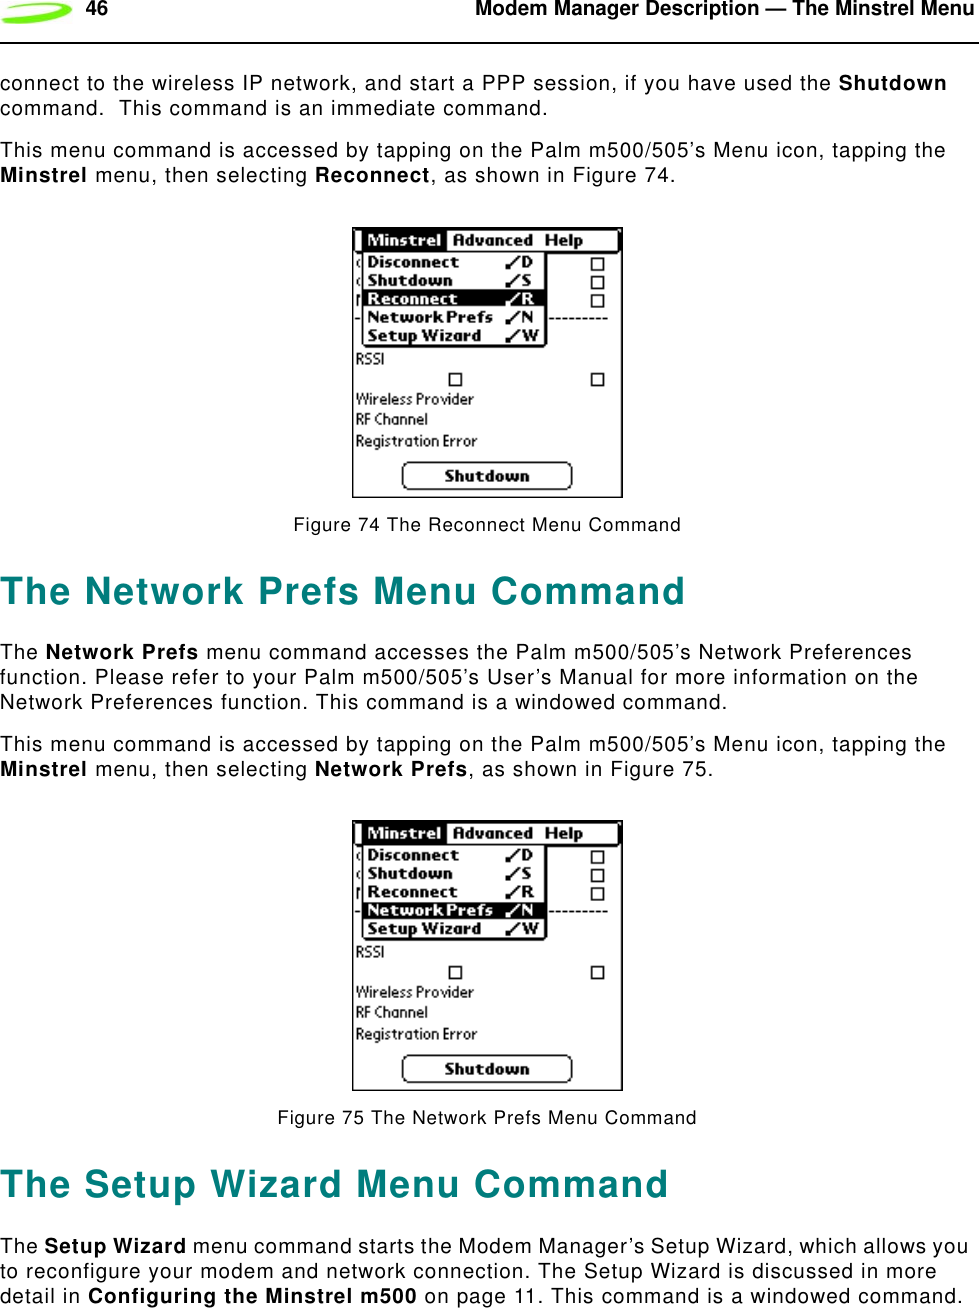 46 Modem Manager Description — The Minstrel Menuconnect to the wireless IP network, and start a PPP session, if you have used the Shutdown command.  This command is an immediate command.This menu command is accessed by tapping on the Palm m500/505’s Menu icon, tapping the Minstrel menu, then selecting Reconnect, as shown in Figure 74.Figure 74 The Reconnect Menu CommandThe Network Prefs Menu CommandThe Network Prefs menu command accesses the Palm m500/505’s Network Preferences function. Please refer to your Palm m500/505’s User’s Manual for more information on the Network Preferences function. This command is a windowed command.This menu command is accessed by tapping on the Palm m500/505’s Menu icon, tapping the Minstrel menu, then selecting Network Prefs, as shown in Figure 75.Figure 75 The Network Prefs Menu CommandThe Setup Wizard Menu CommandThe Setup Wizard menu command starts the Modem Manager’s Setup Wizard, which allows you to reconfigure your modem and network connection. The Setup Wizard is discussed in more detail in Configuring the Minstrel m500 on page 11. This command is a windowed command.